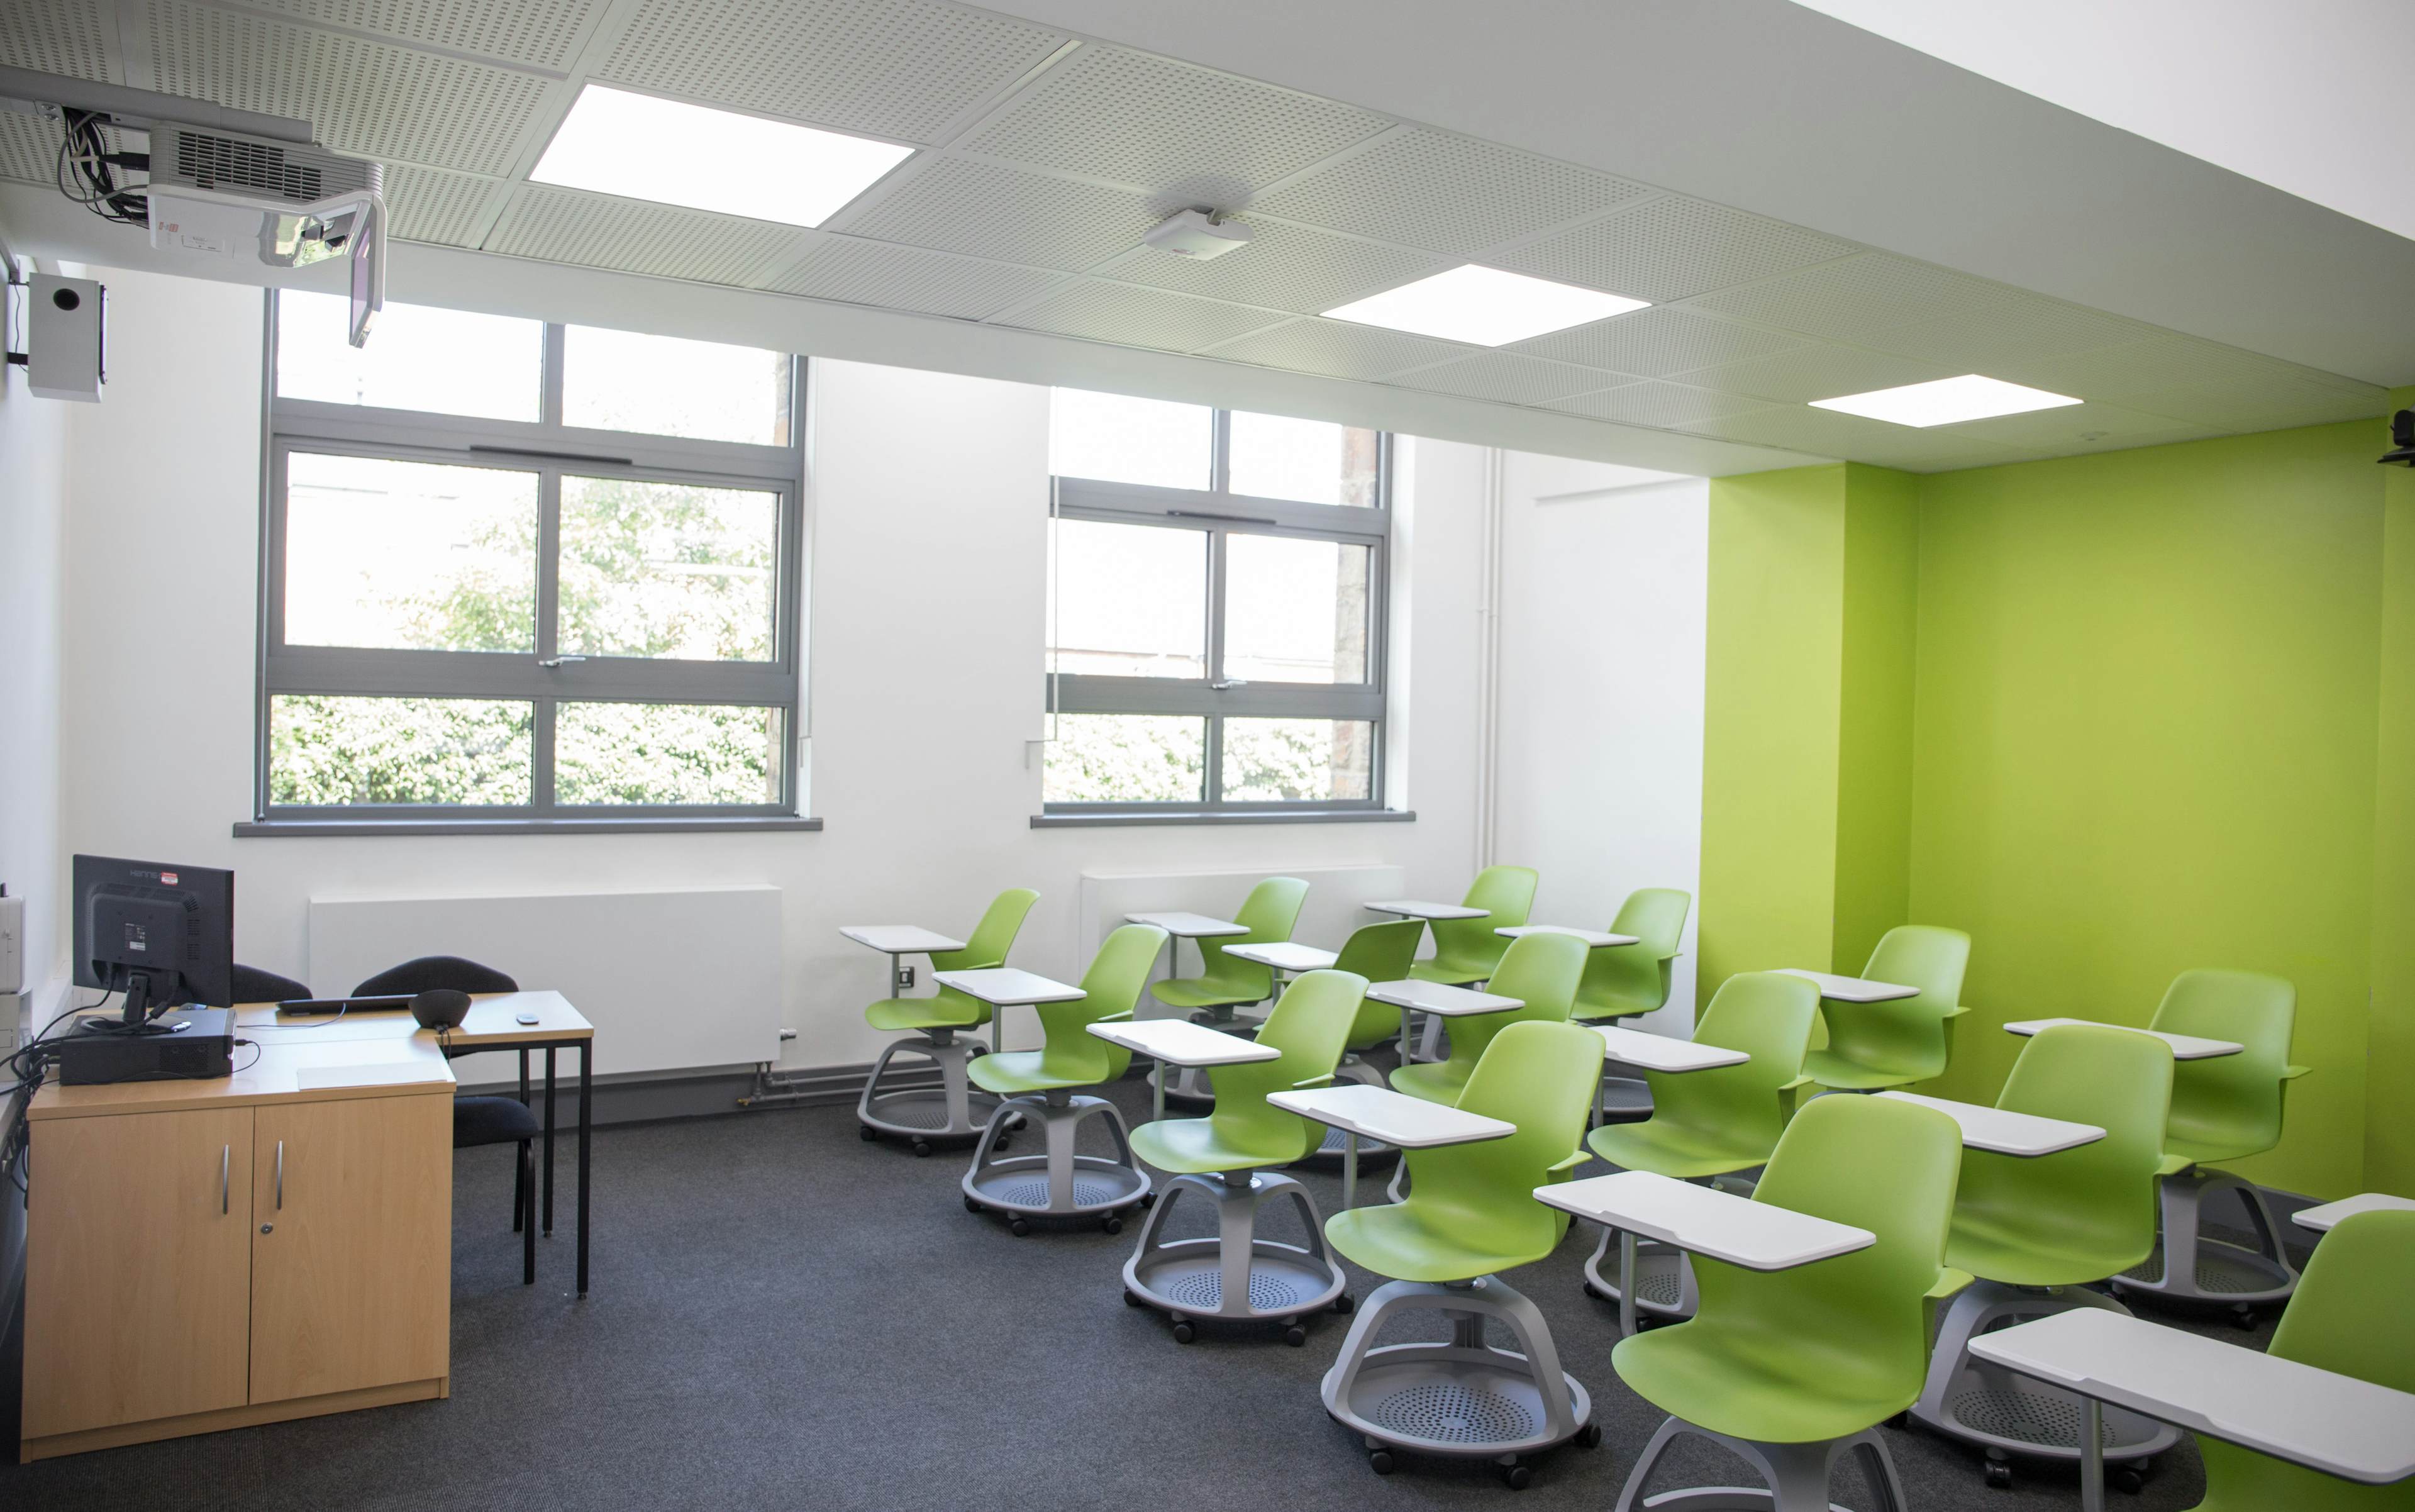 Chesterfield College - Classrooms image 1